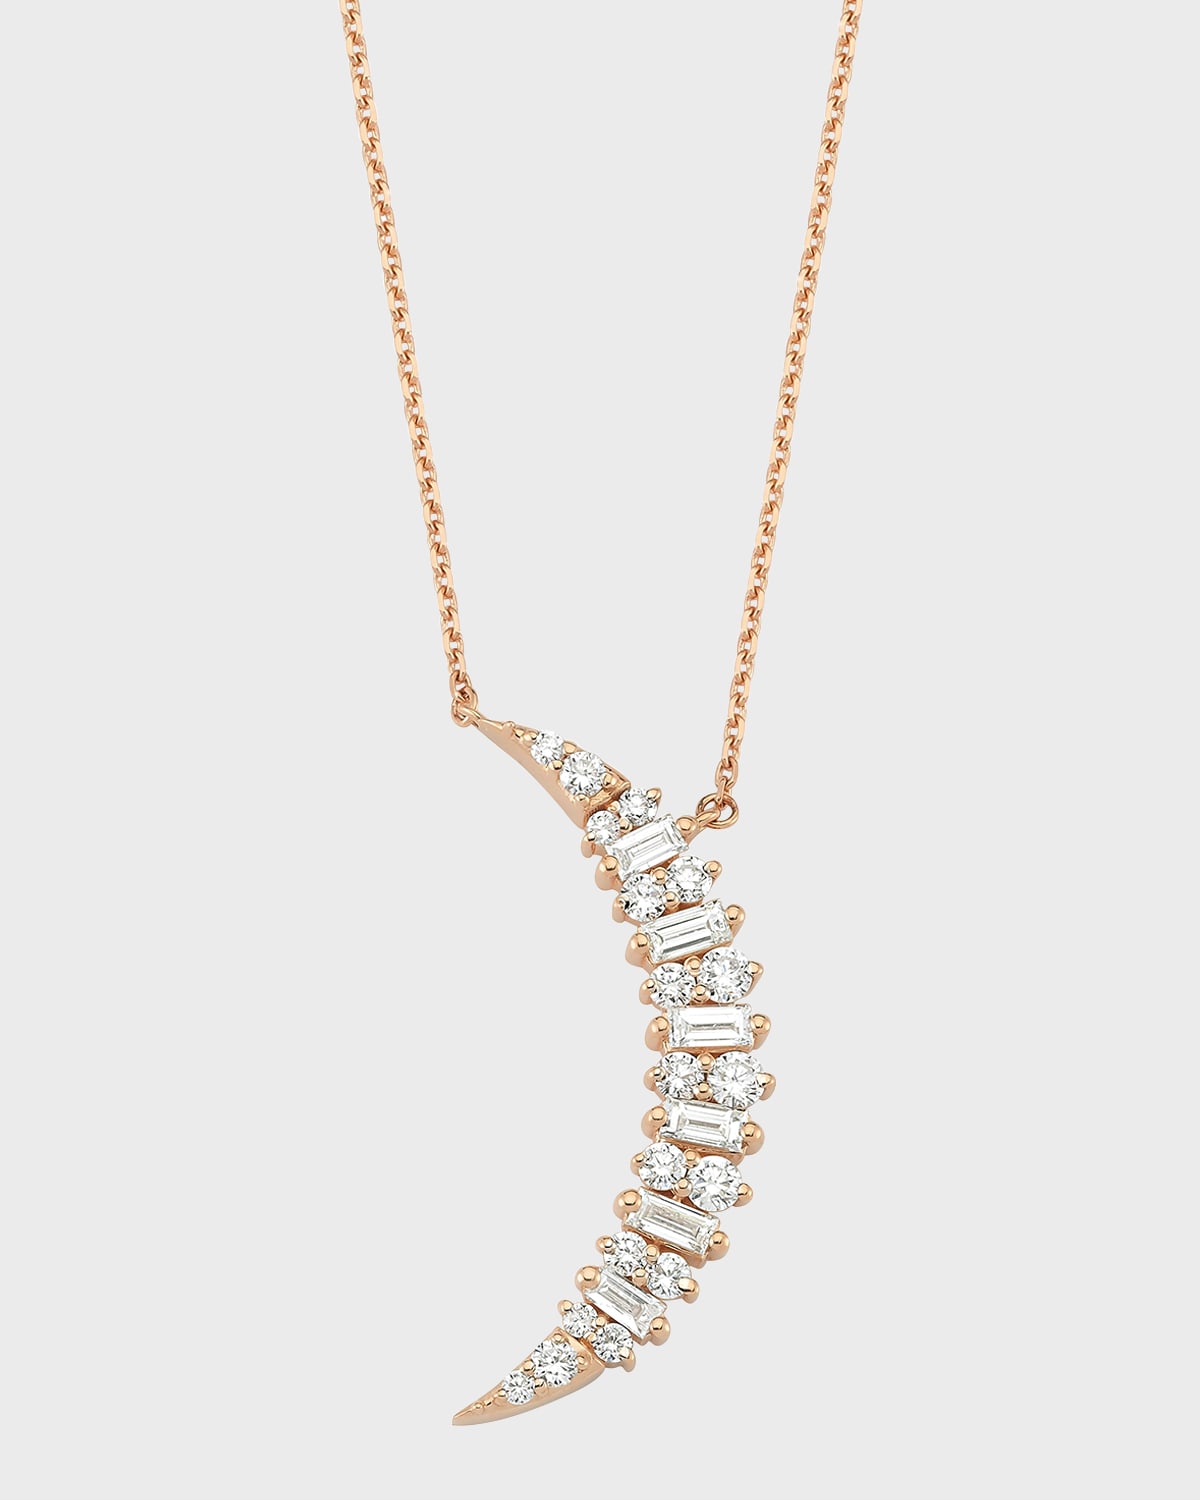 Crescent Round and Baguette Diamond Necklace